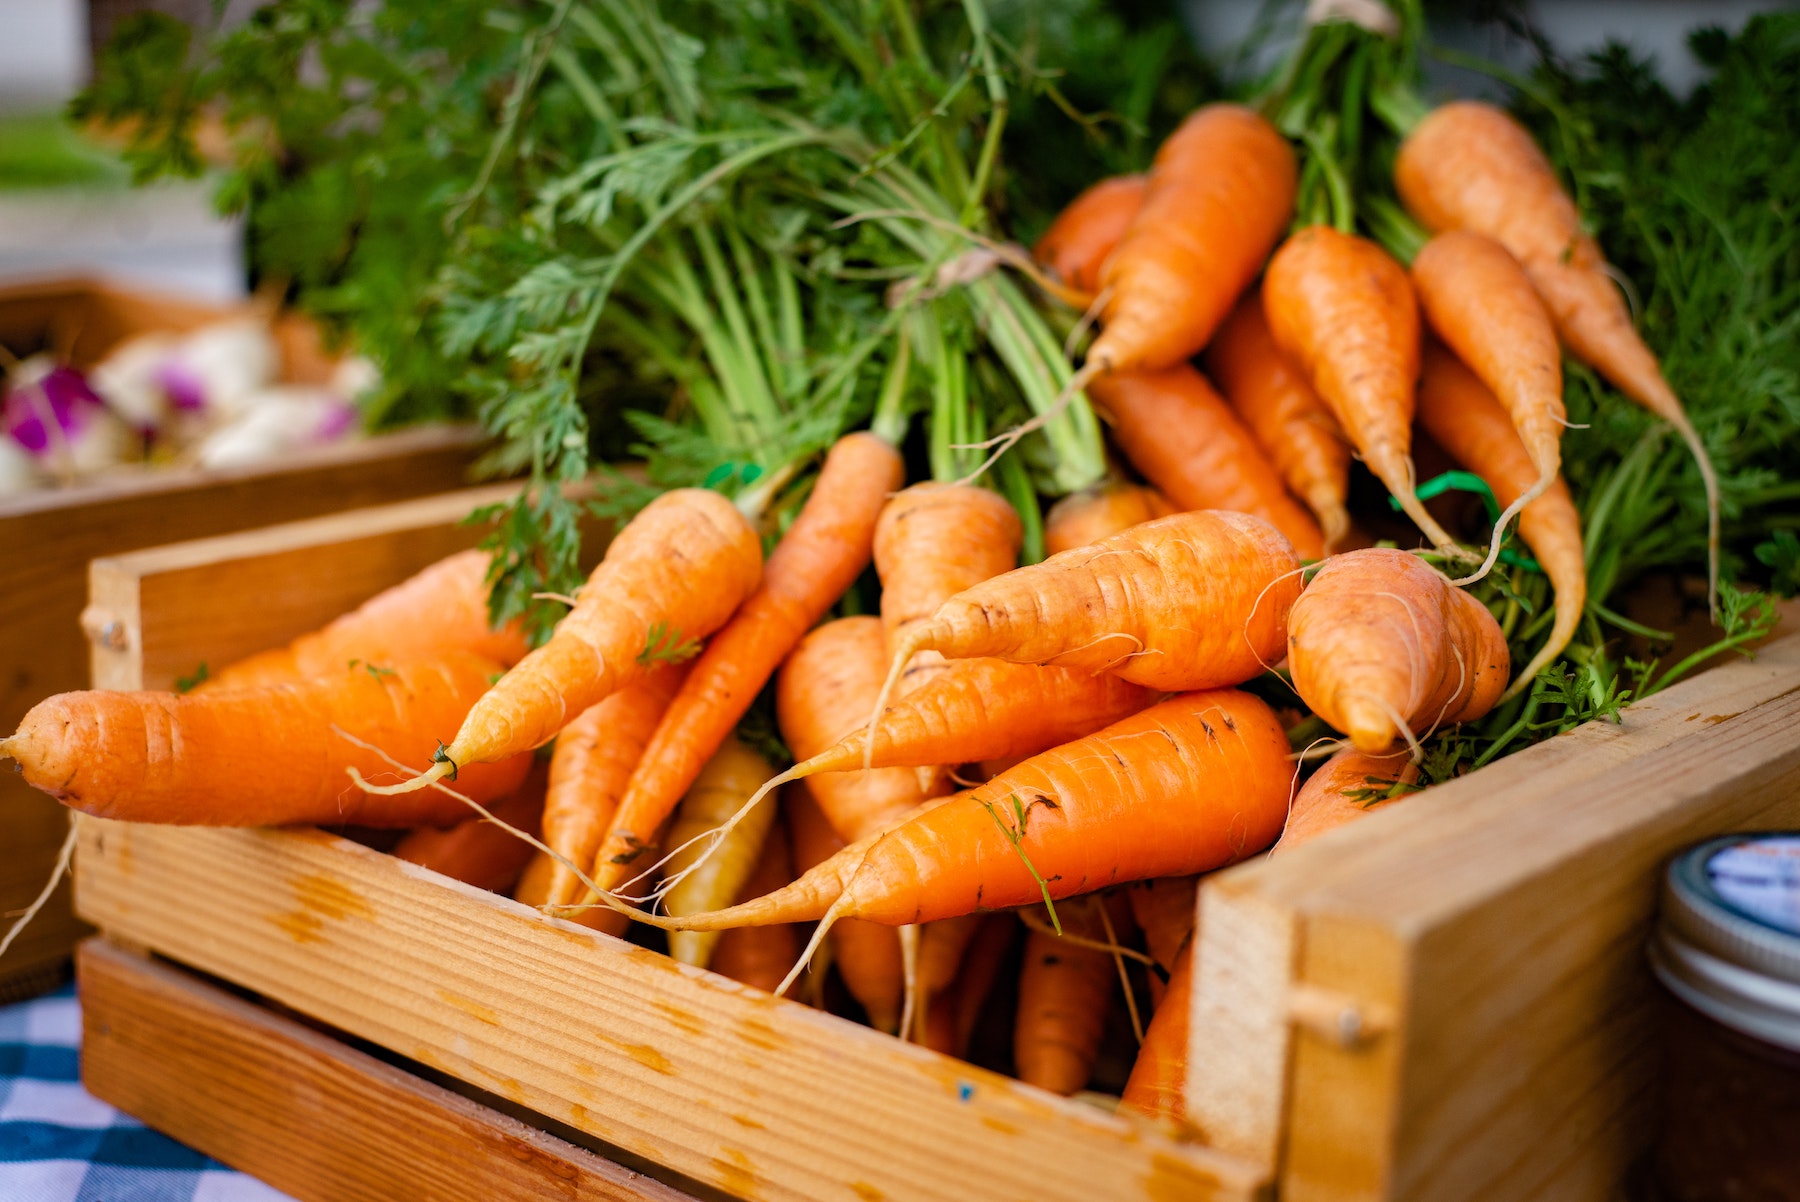 ## How to grow Carrots